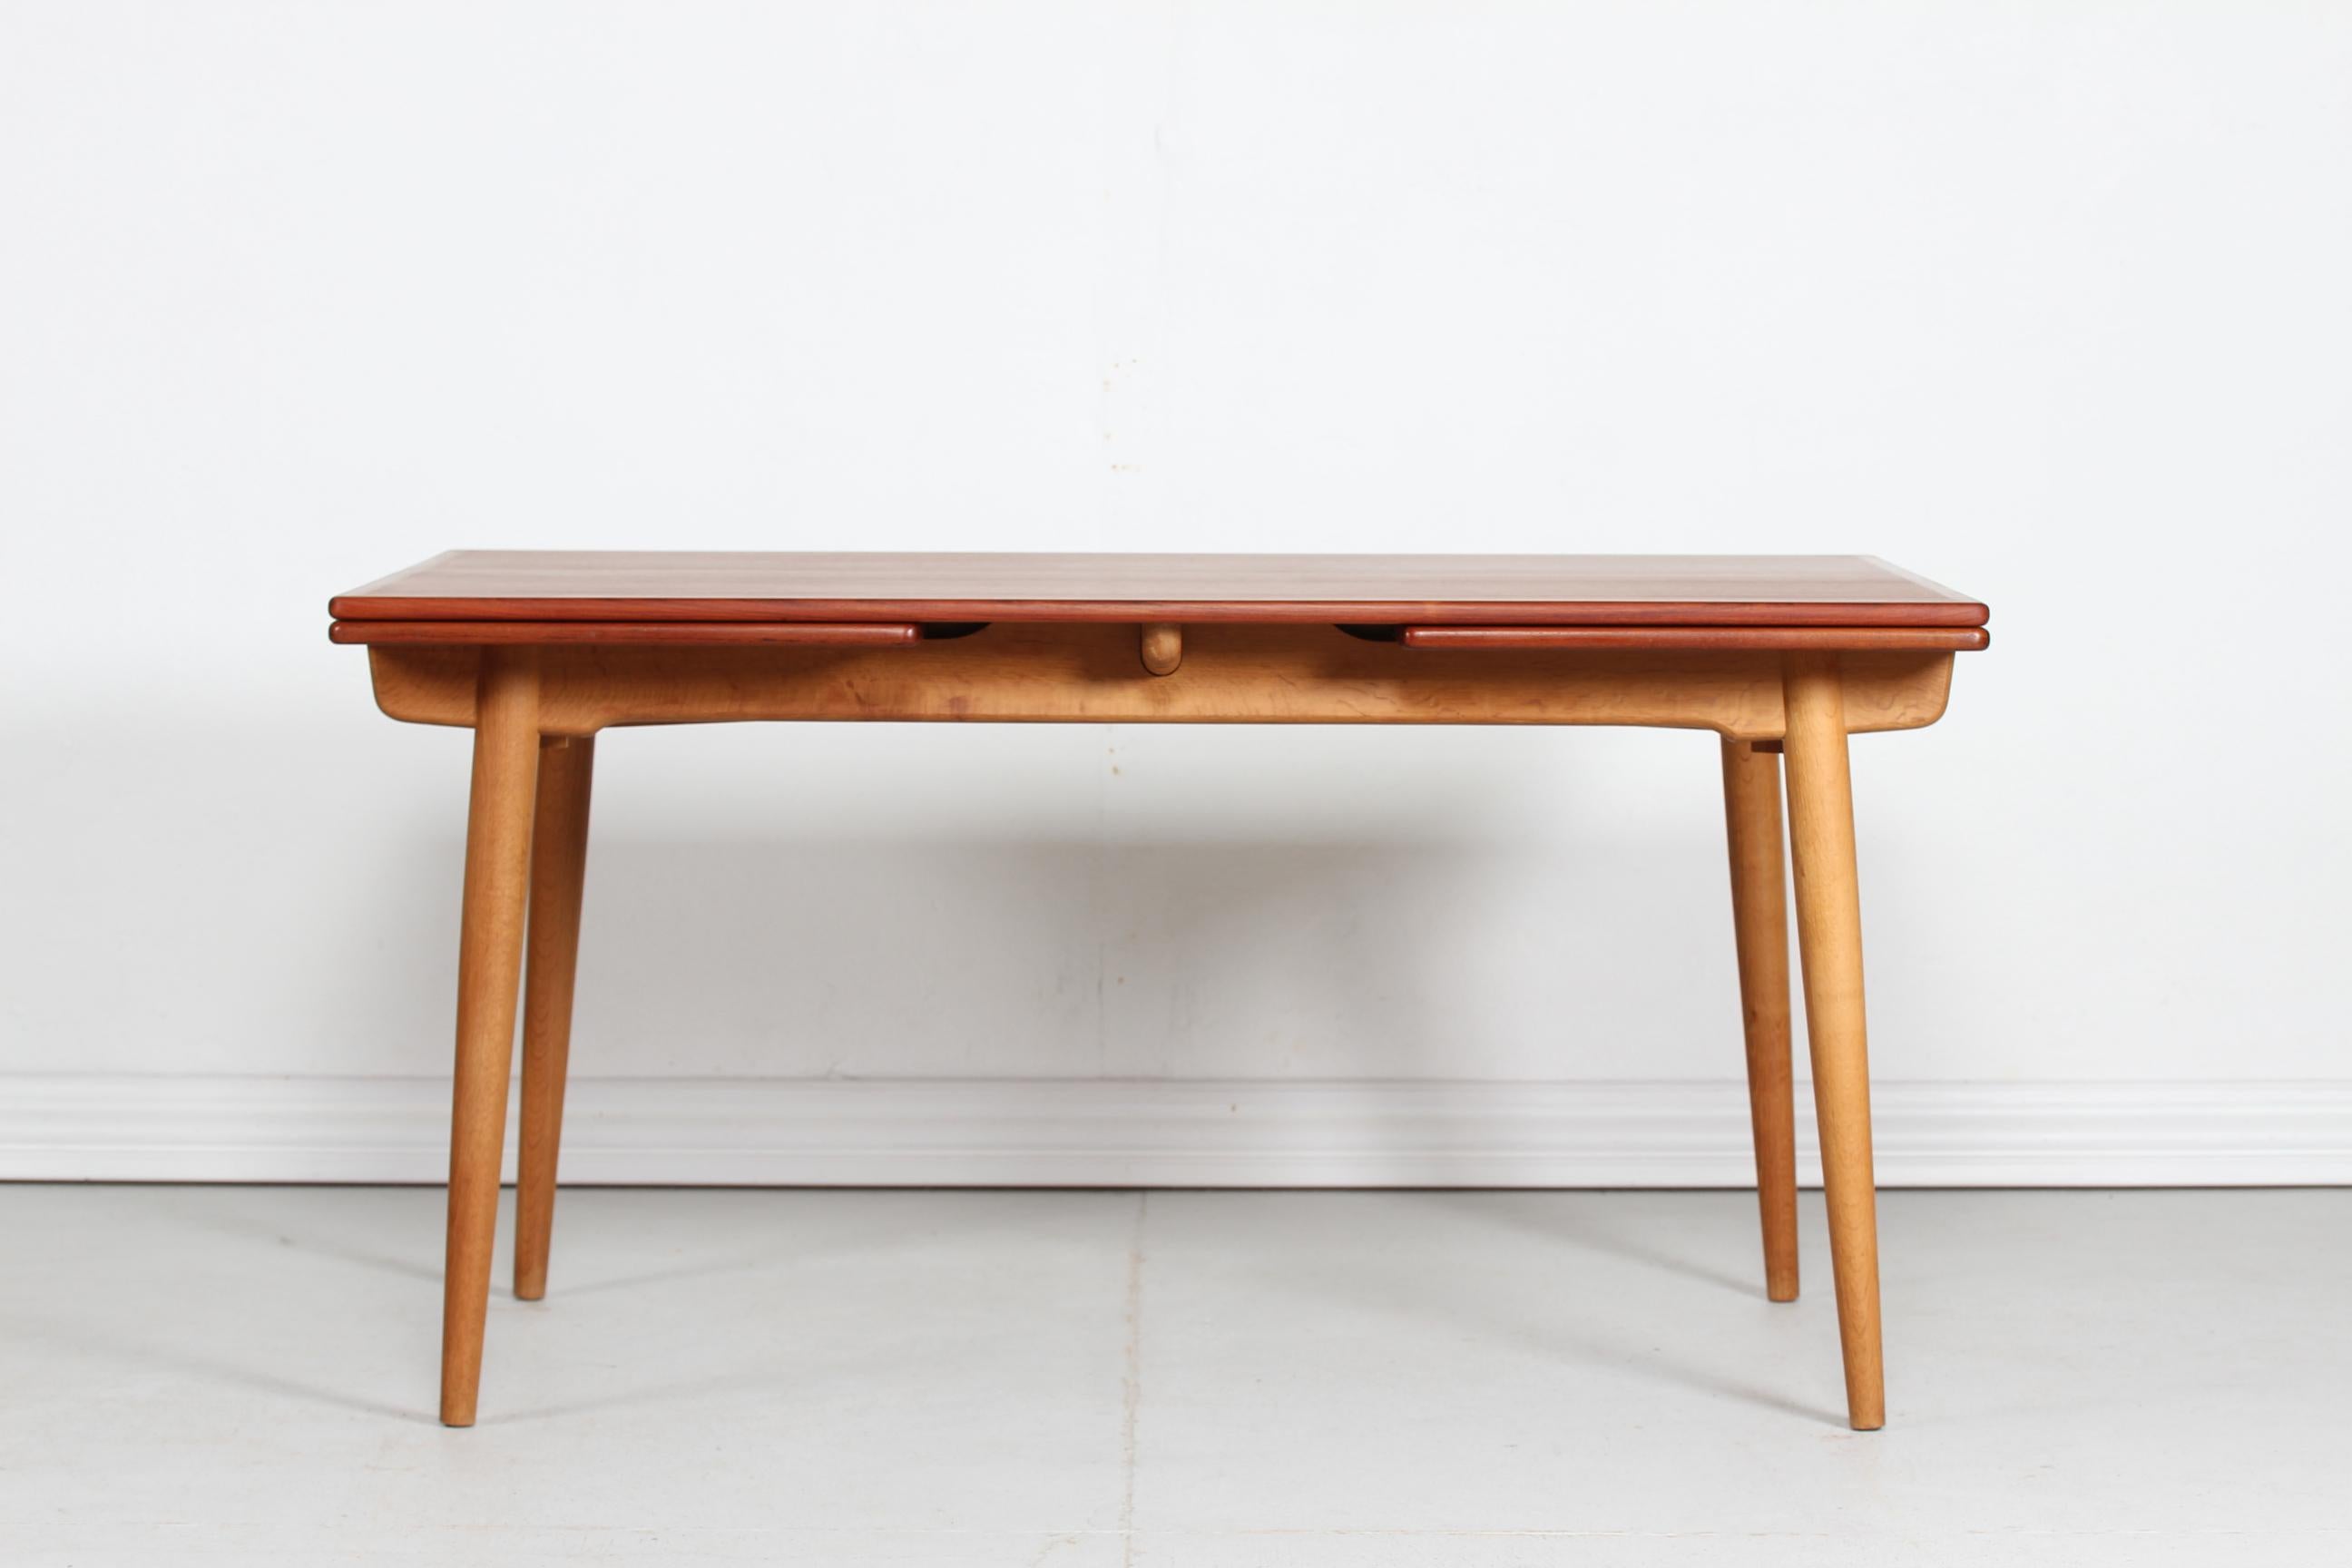 Dining table model AT 312 by the Danish architect Hans J. Wegner and manufactured by Andreas Tuck in the 1950s.

The dining table has a frame of solid oak and a top of teak veneer. Two pull-out-leaves make extension possible. The two leaves hide